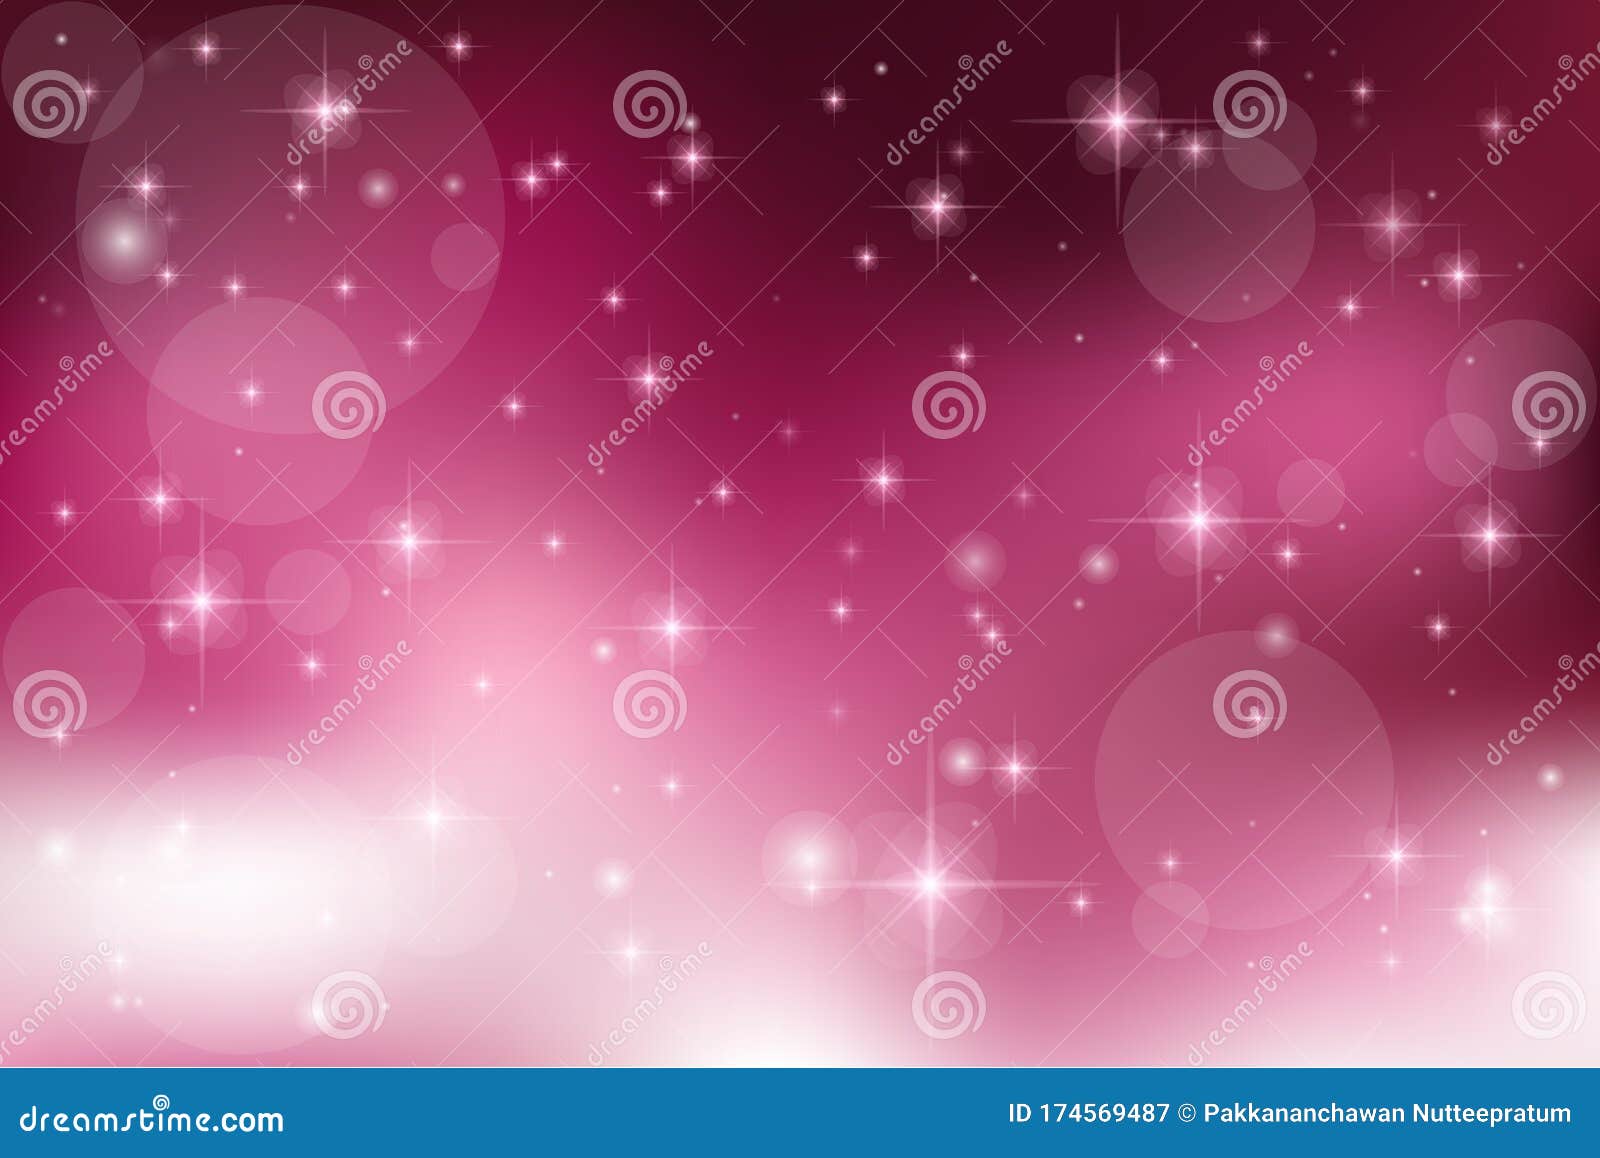 Galaxy Fantasy Background Of Cute Bright Star On Pastel Pink Color